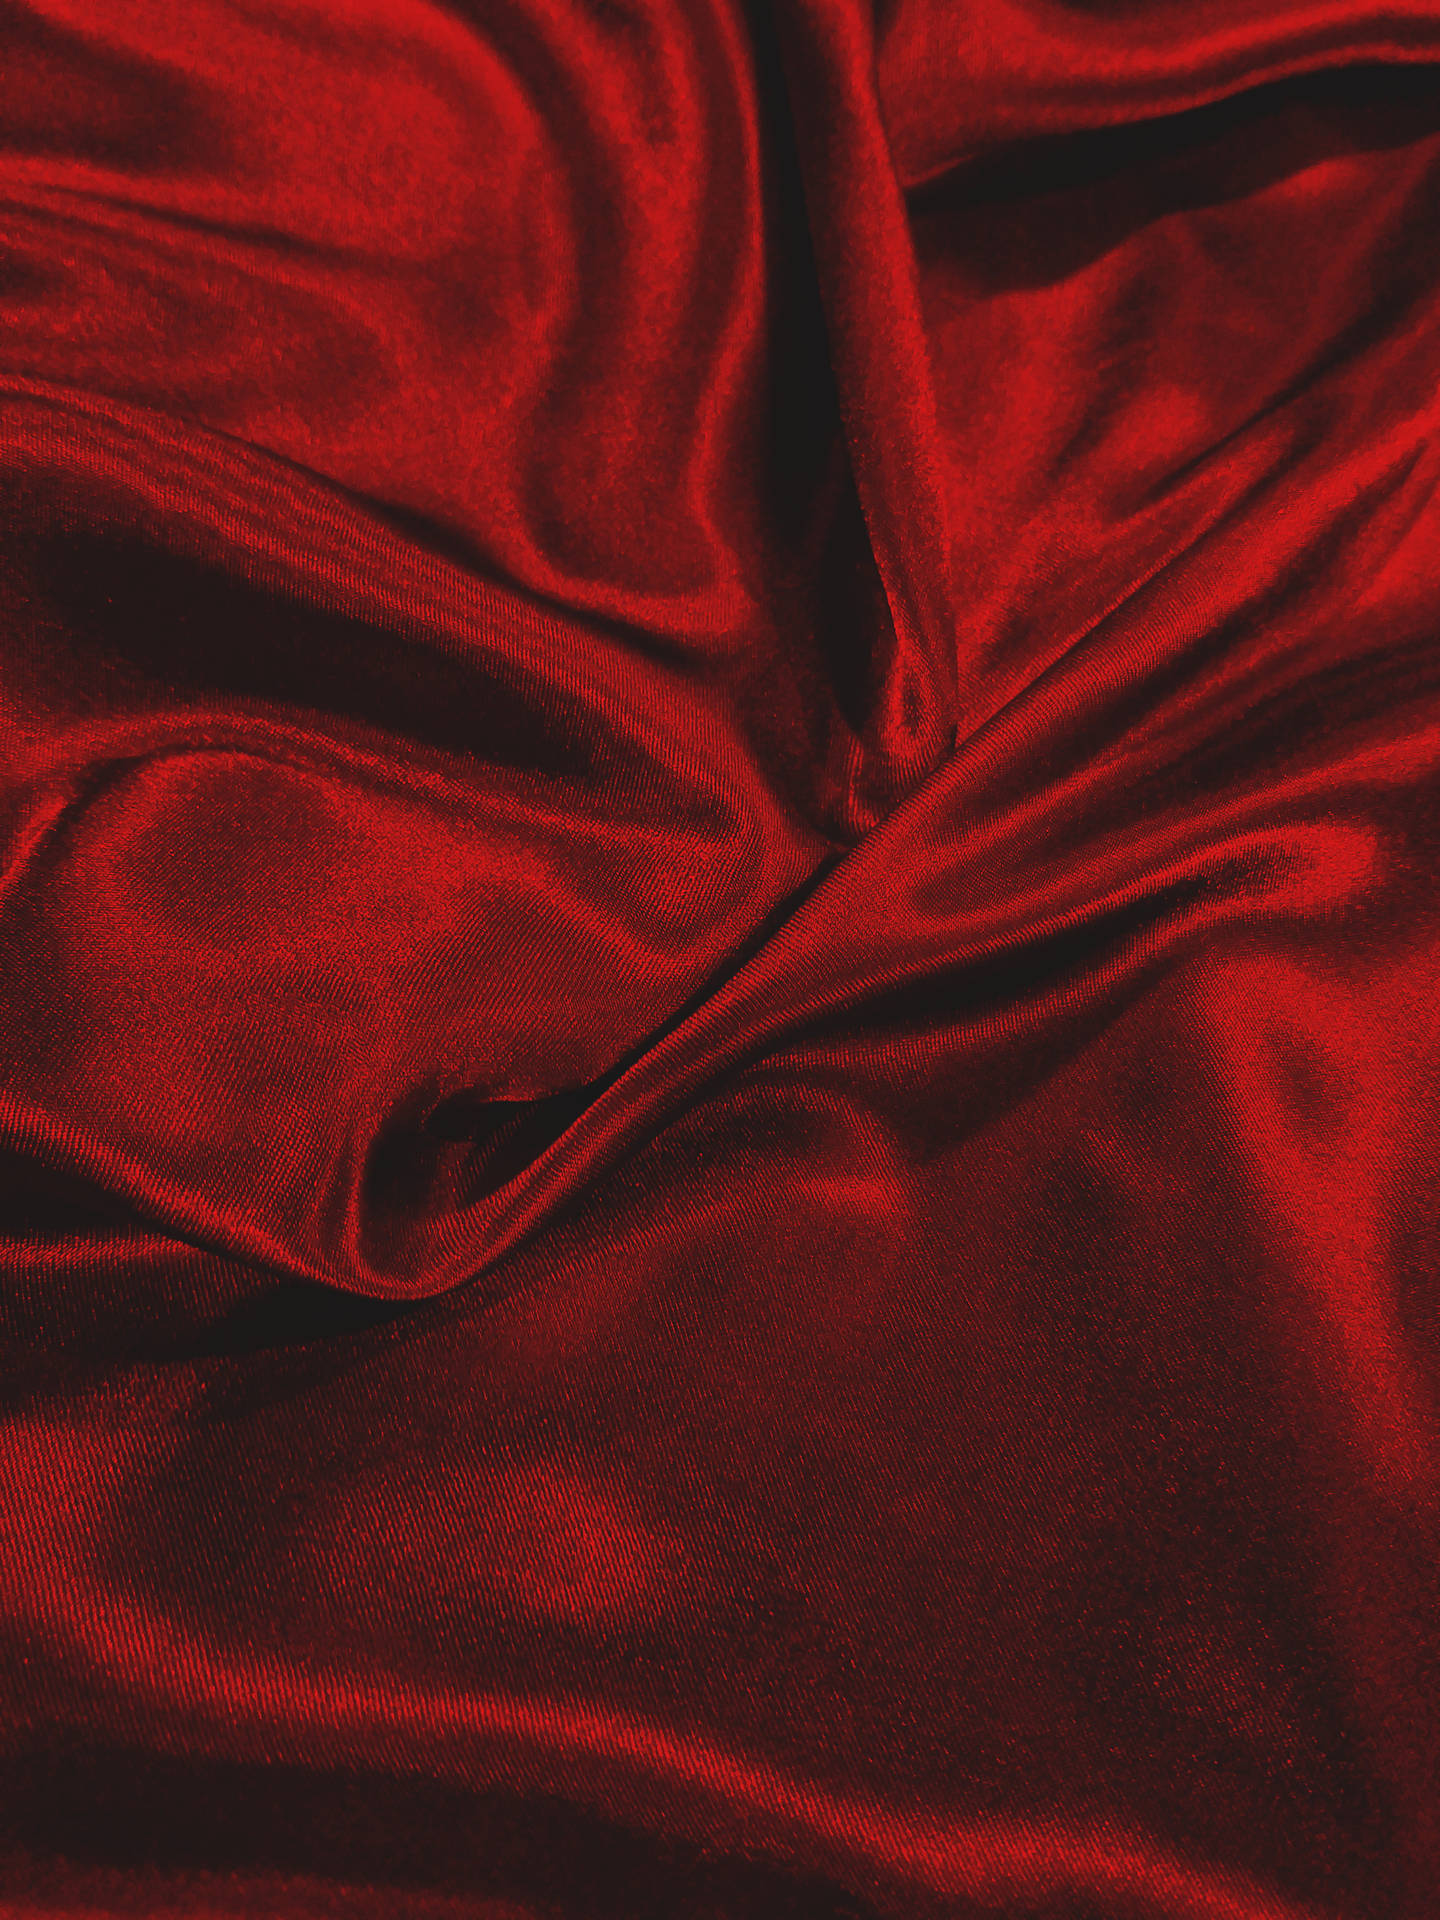 Red Soft Satin Cloth Picture